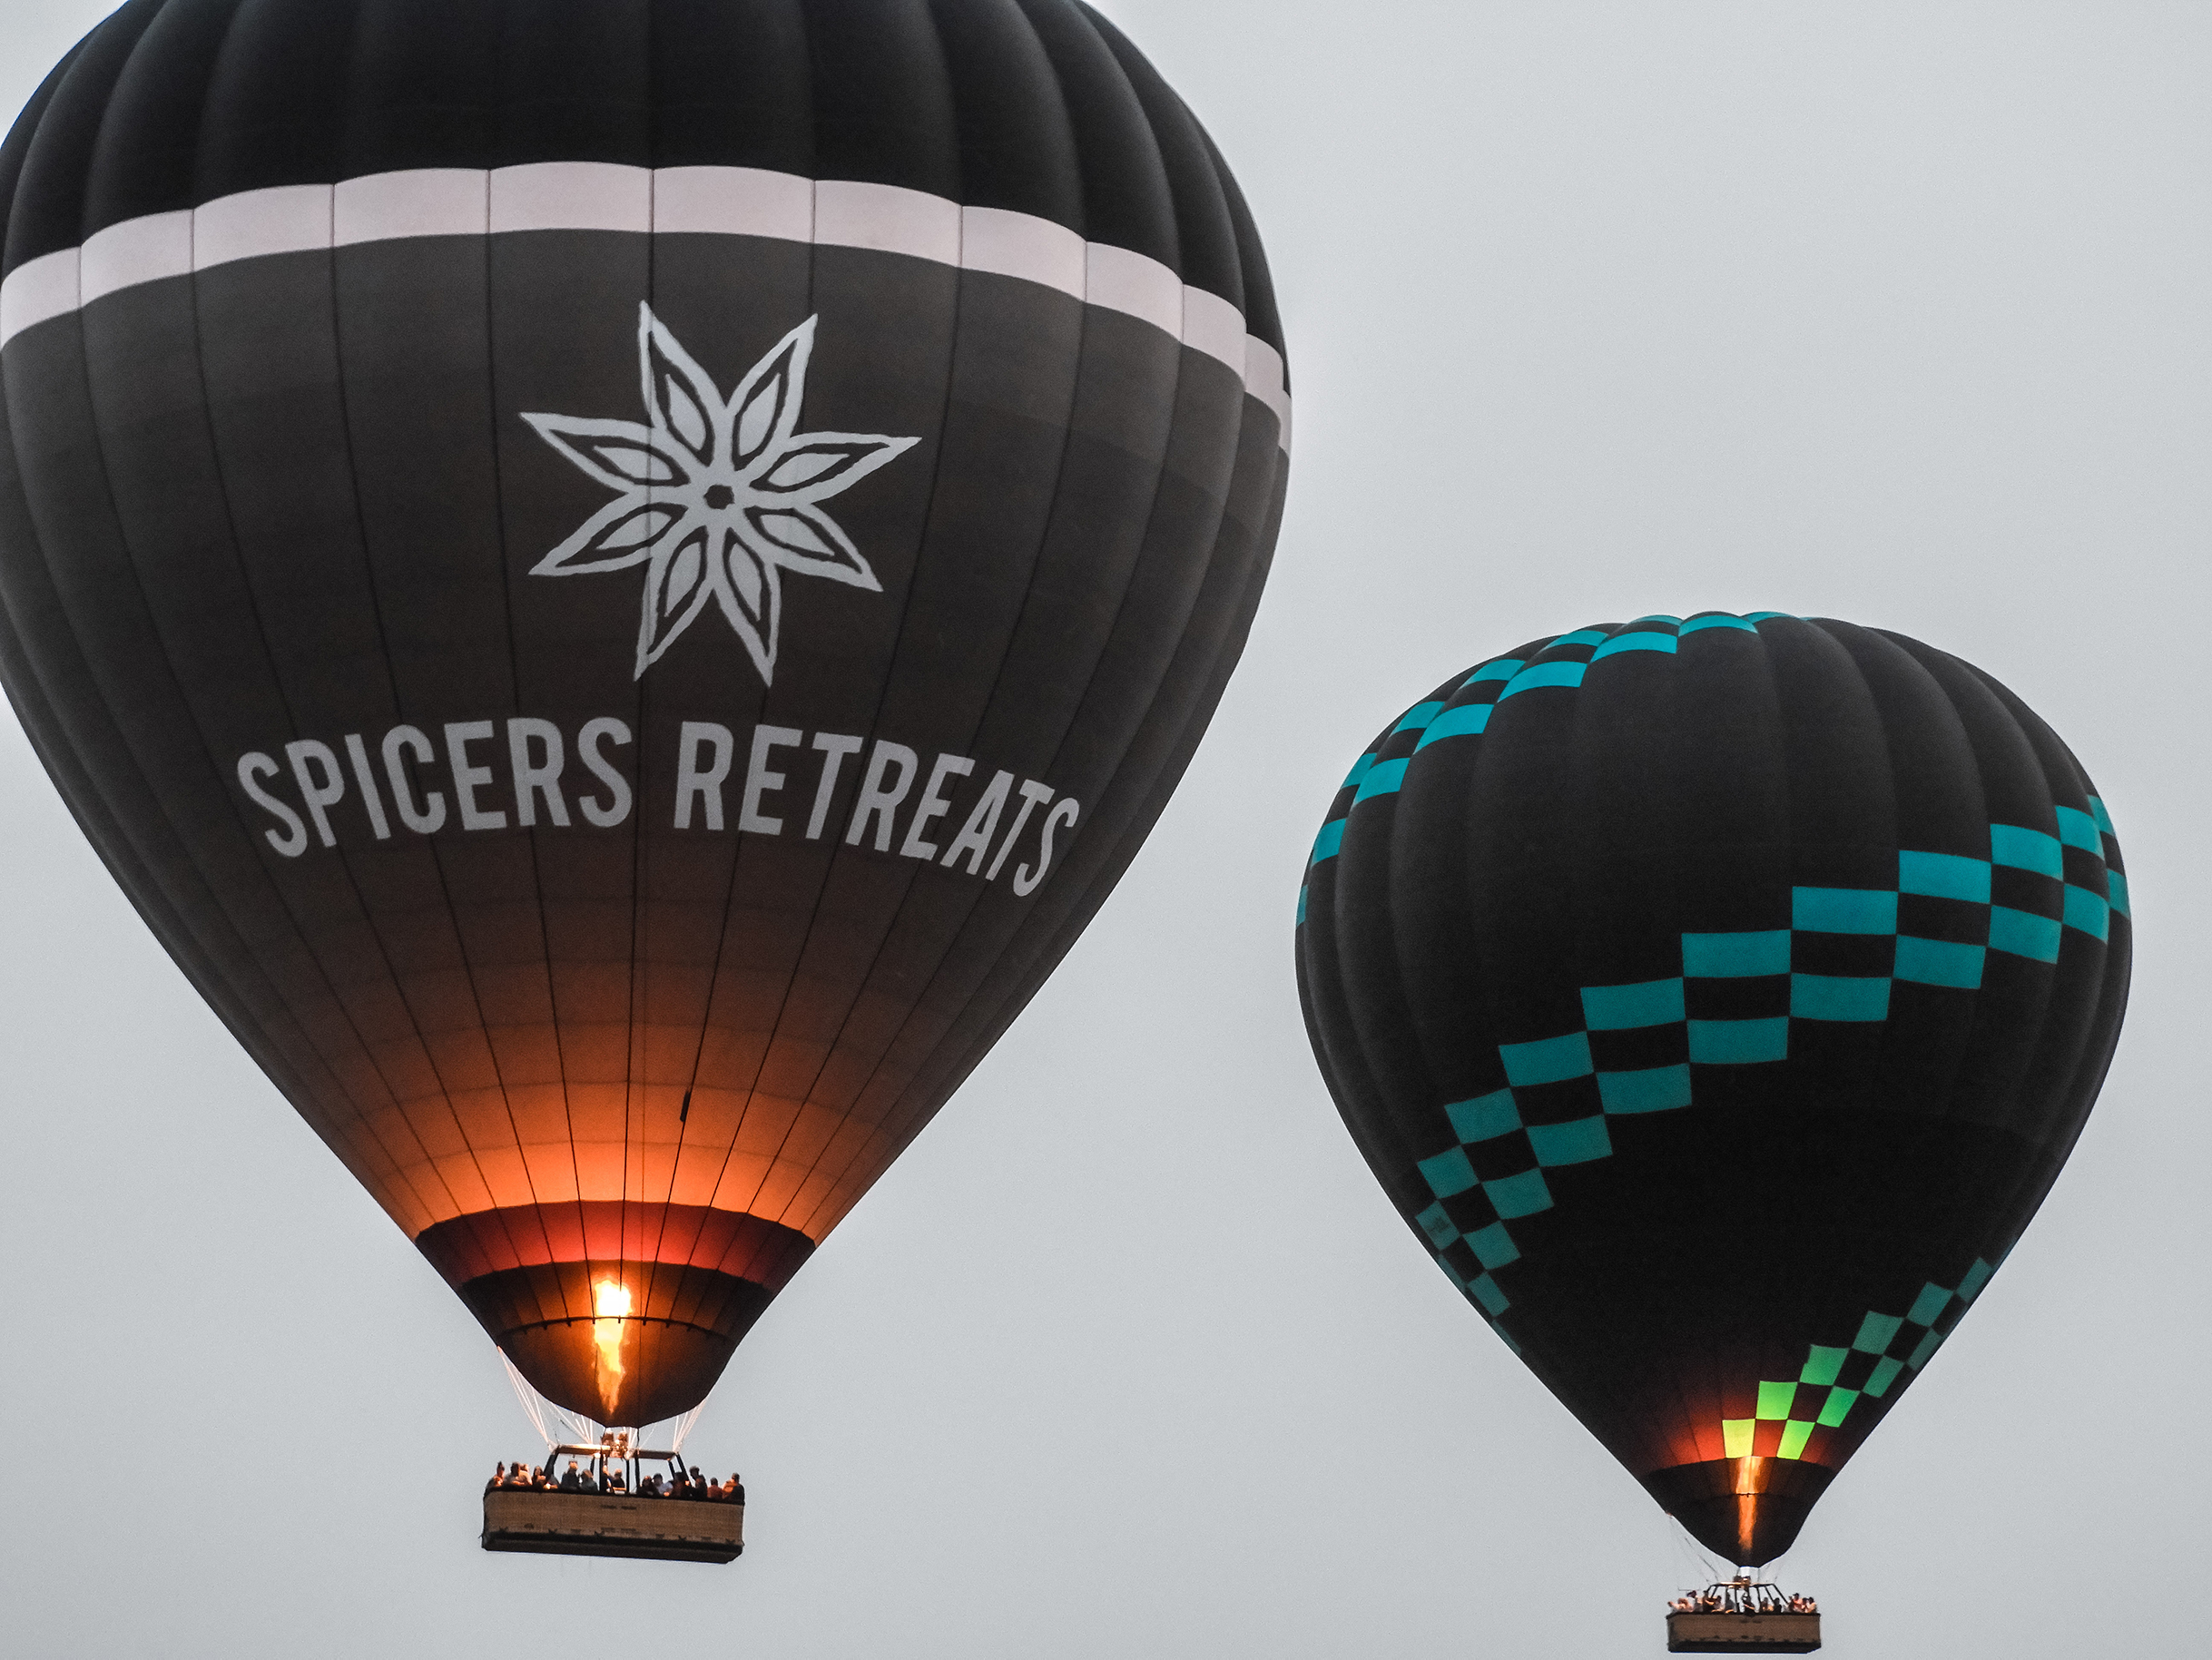 spicers retreats and black and blue balloon flying